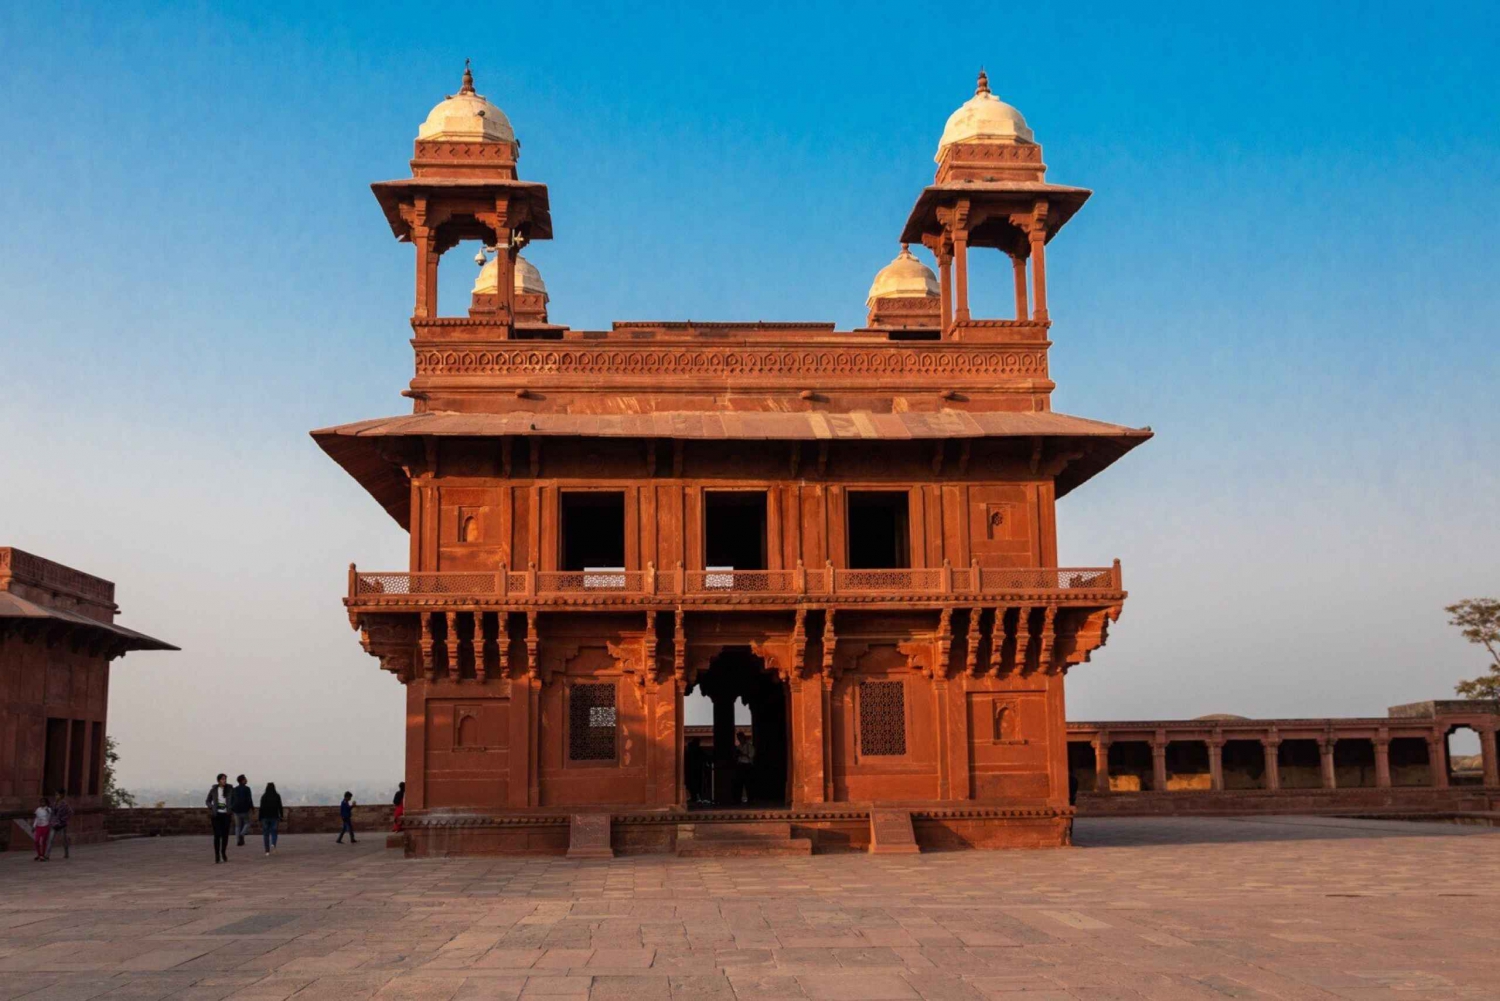 From Delhi: Private 4-Days Golden Triangle Luxury Tour